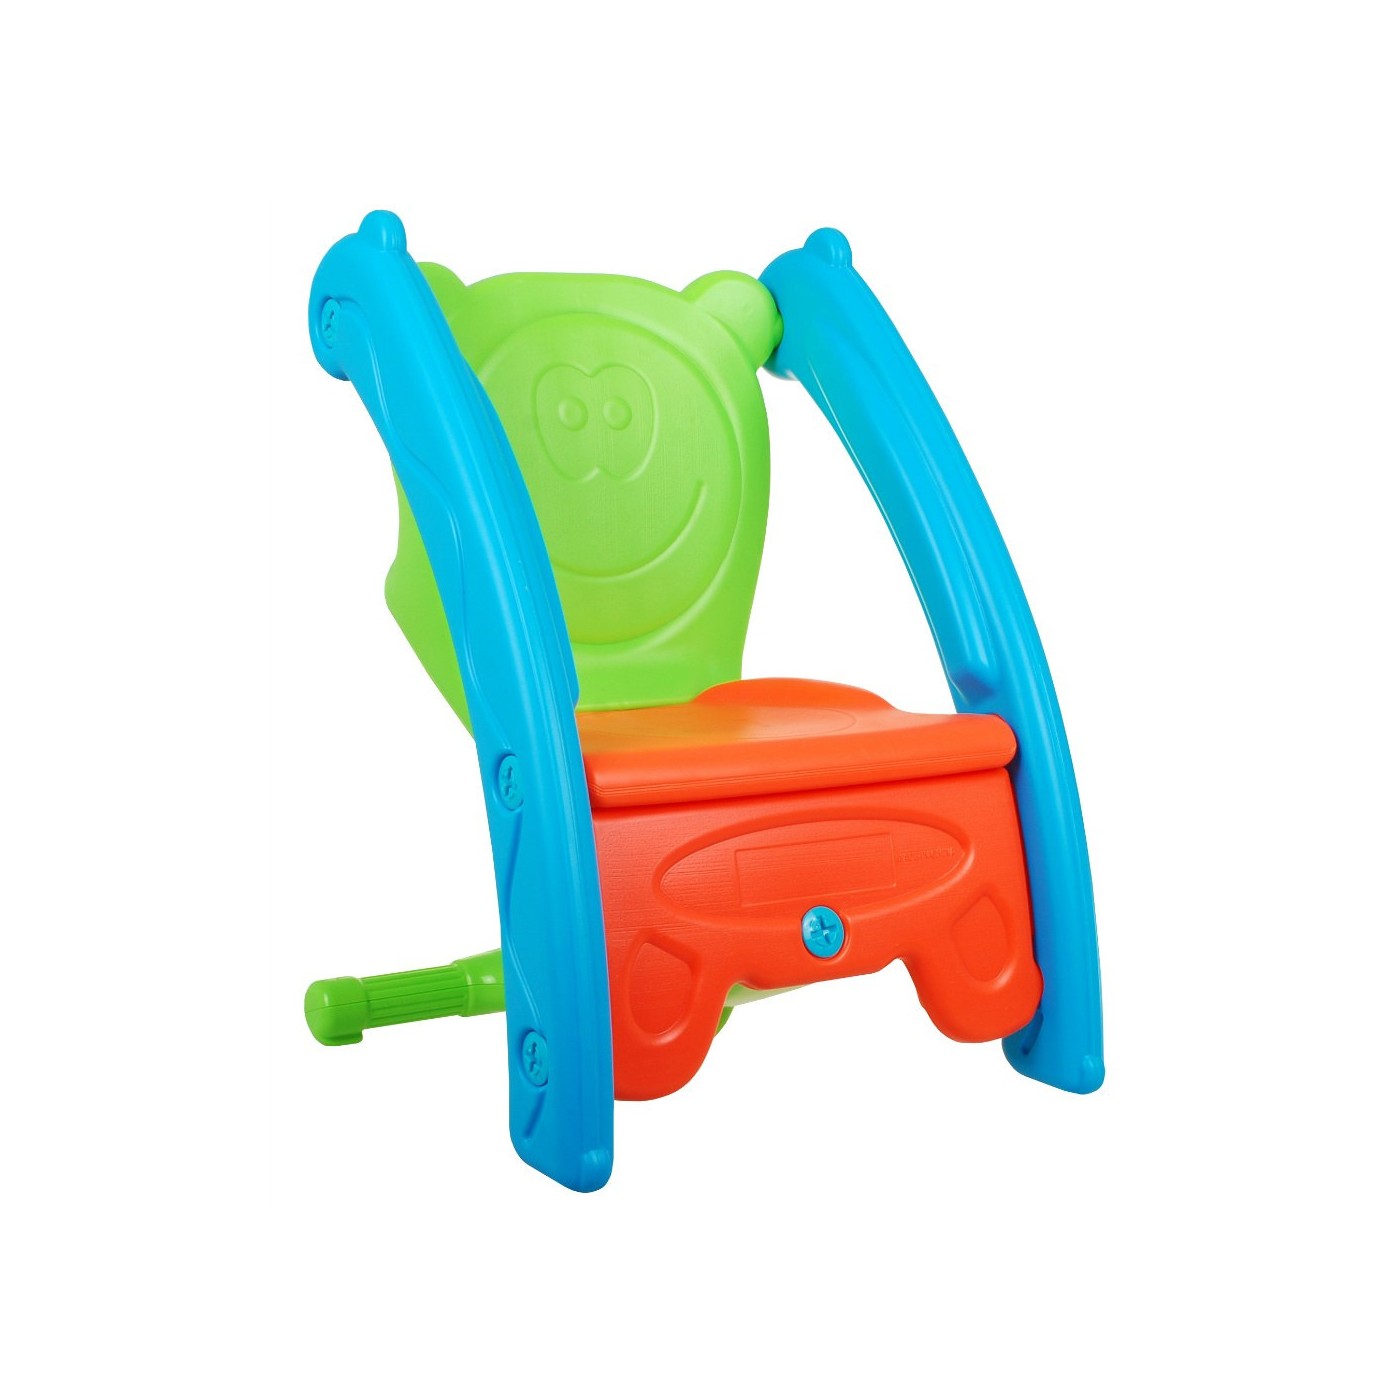 2-in-1 Swing rocking chair seat